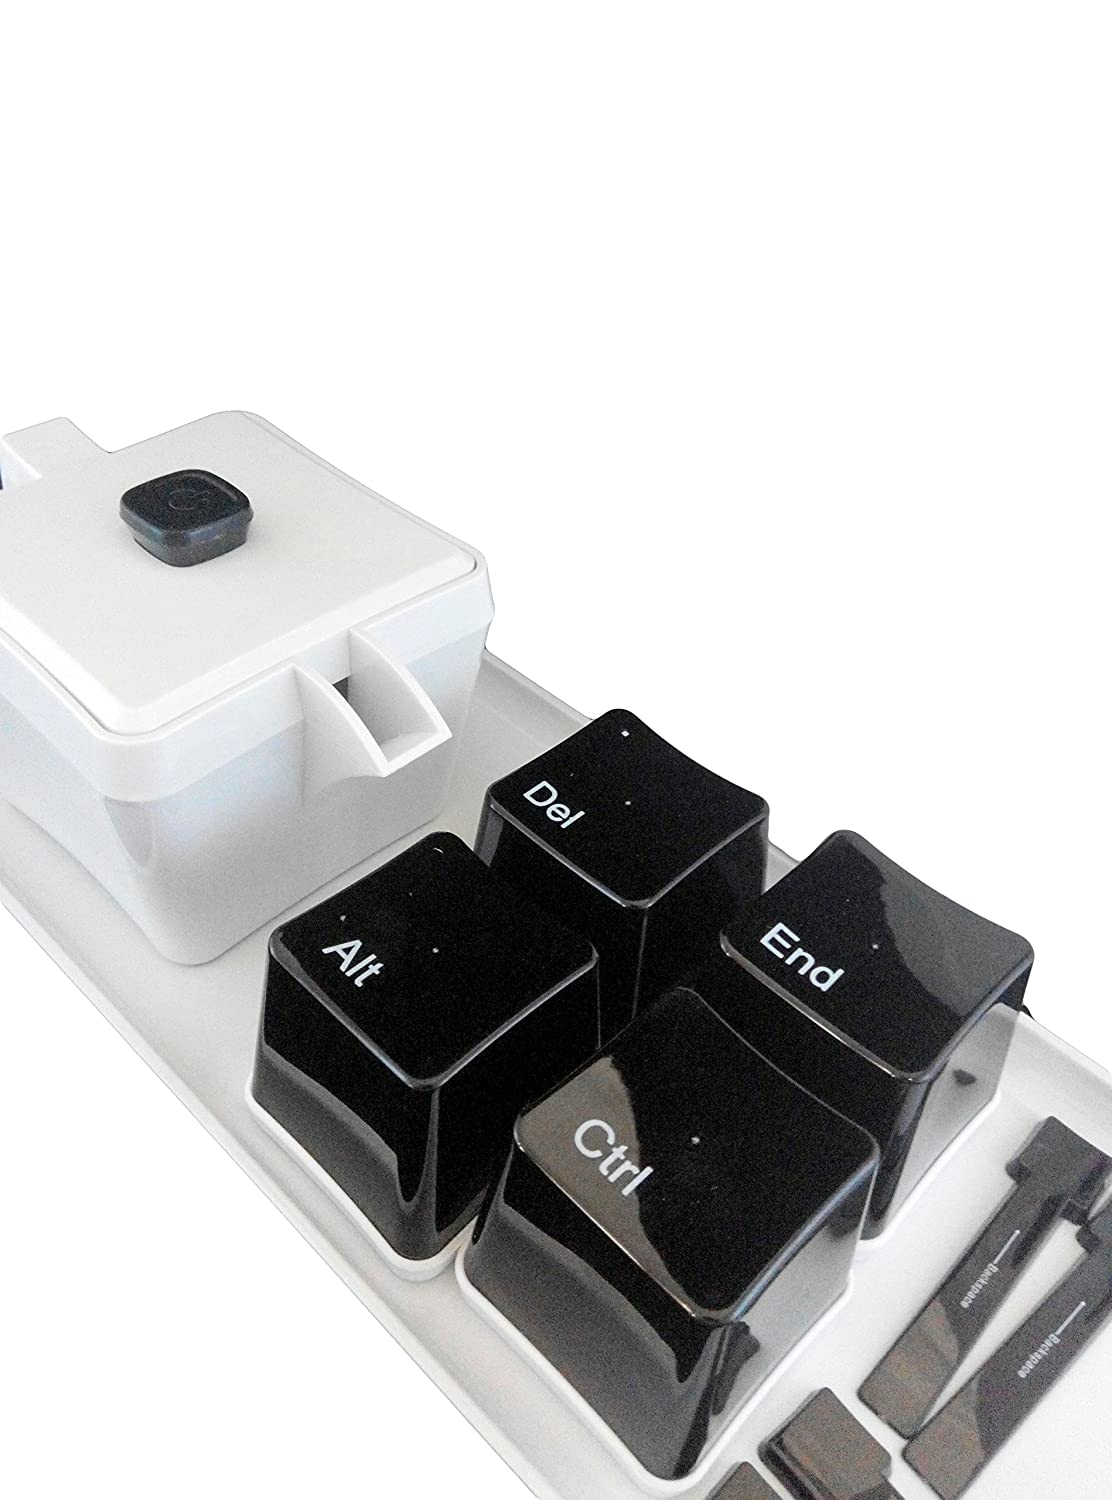 Keyboard Ctrl Alt Del Cup Set with Tray Power Teapot freeshipping - GeekGoodies.in